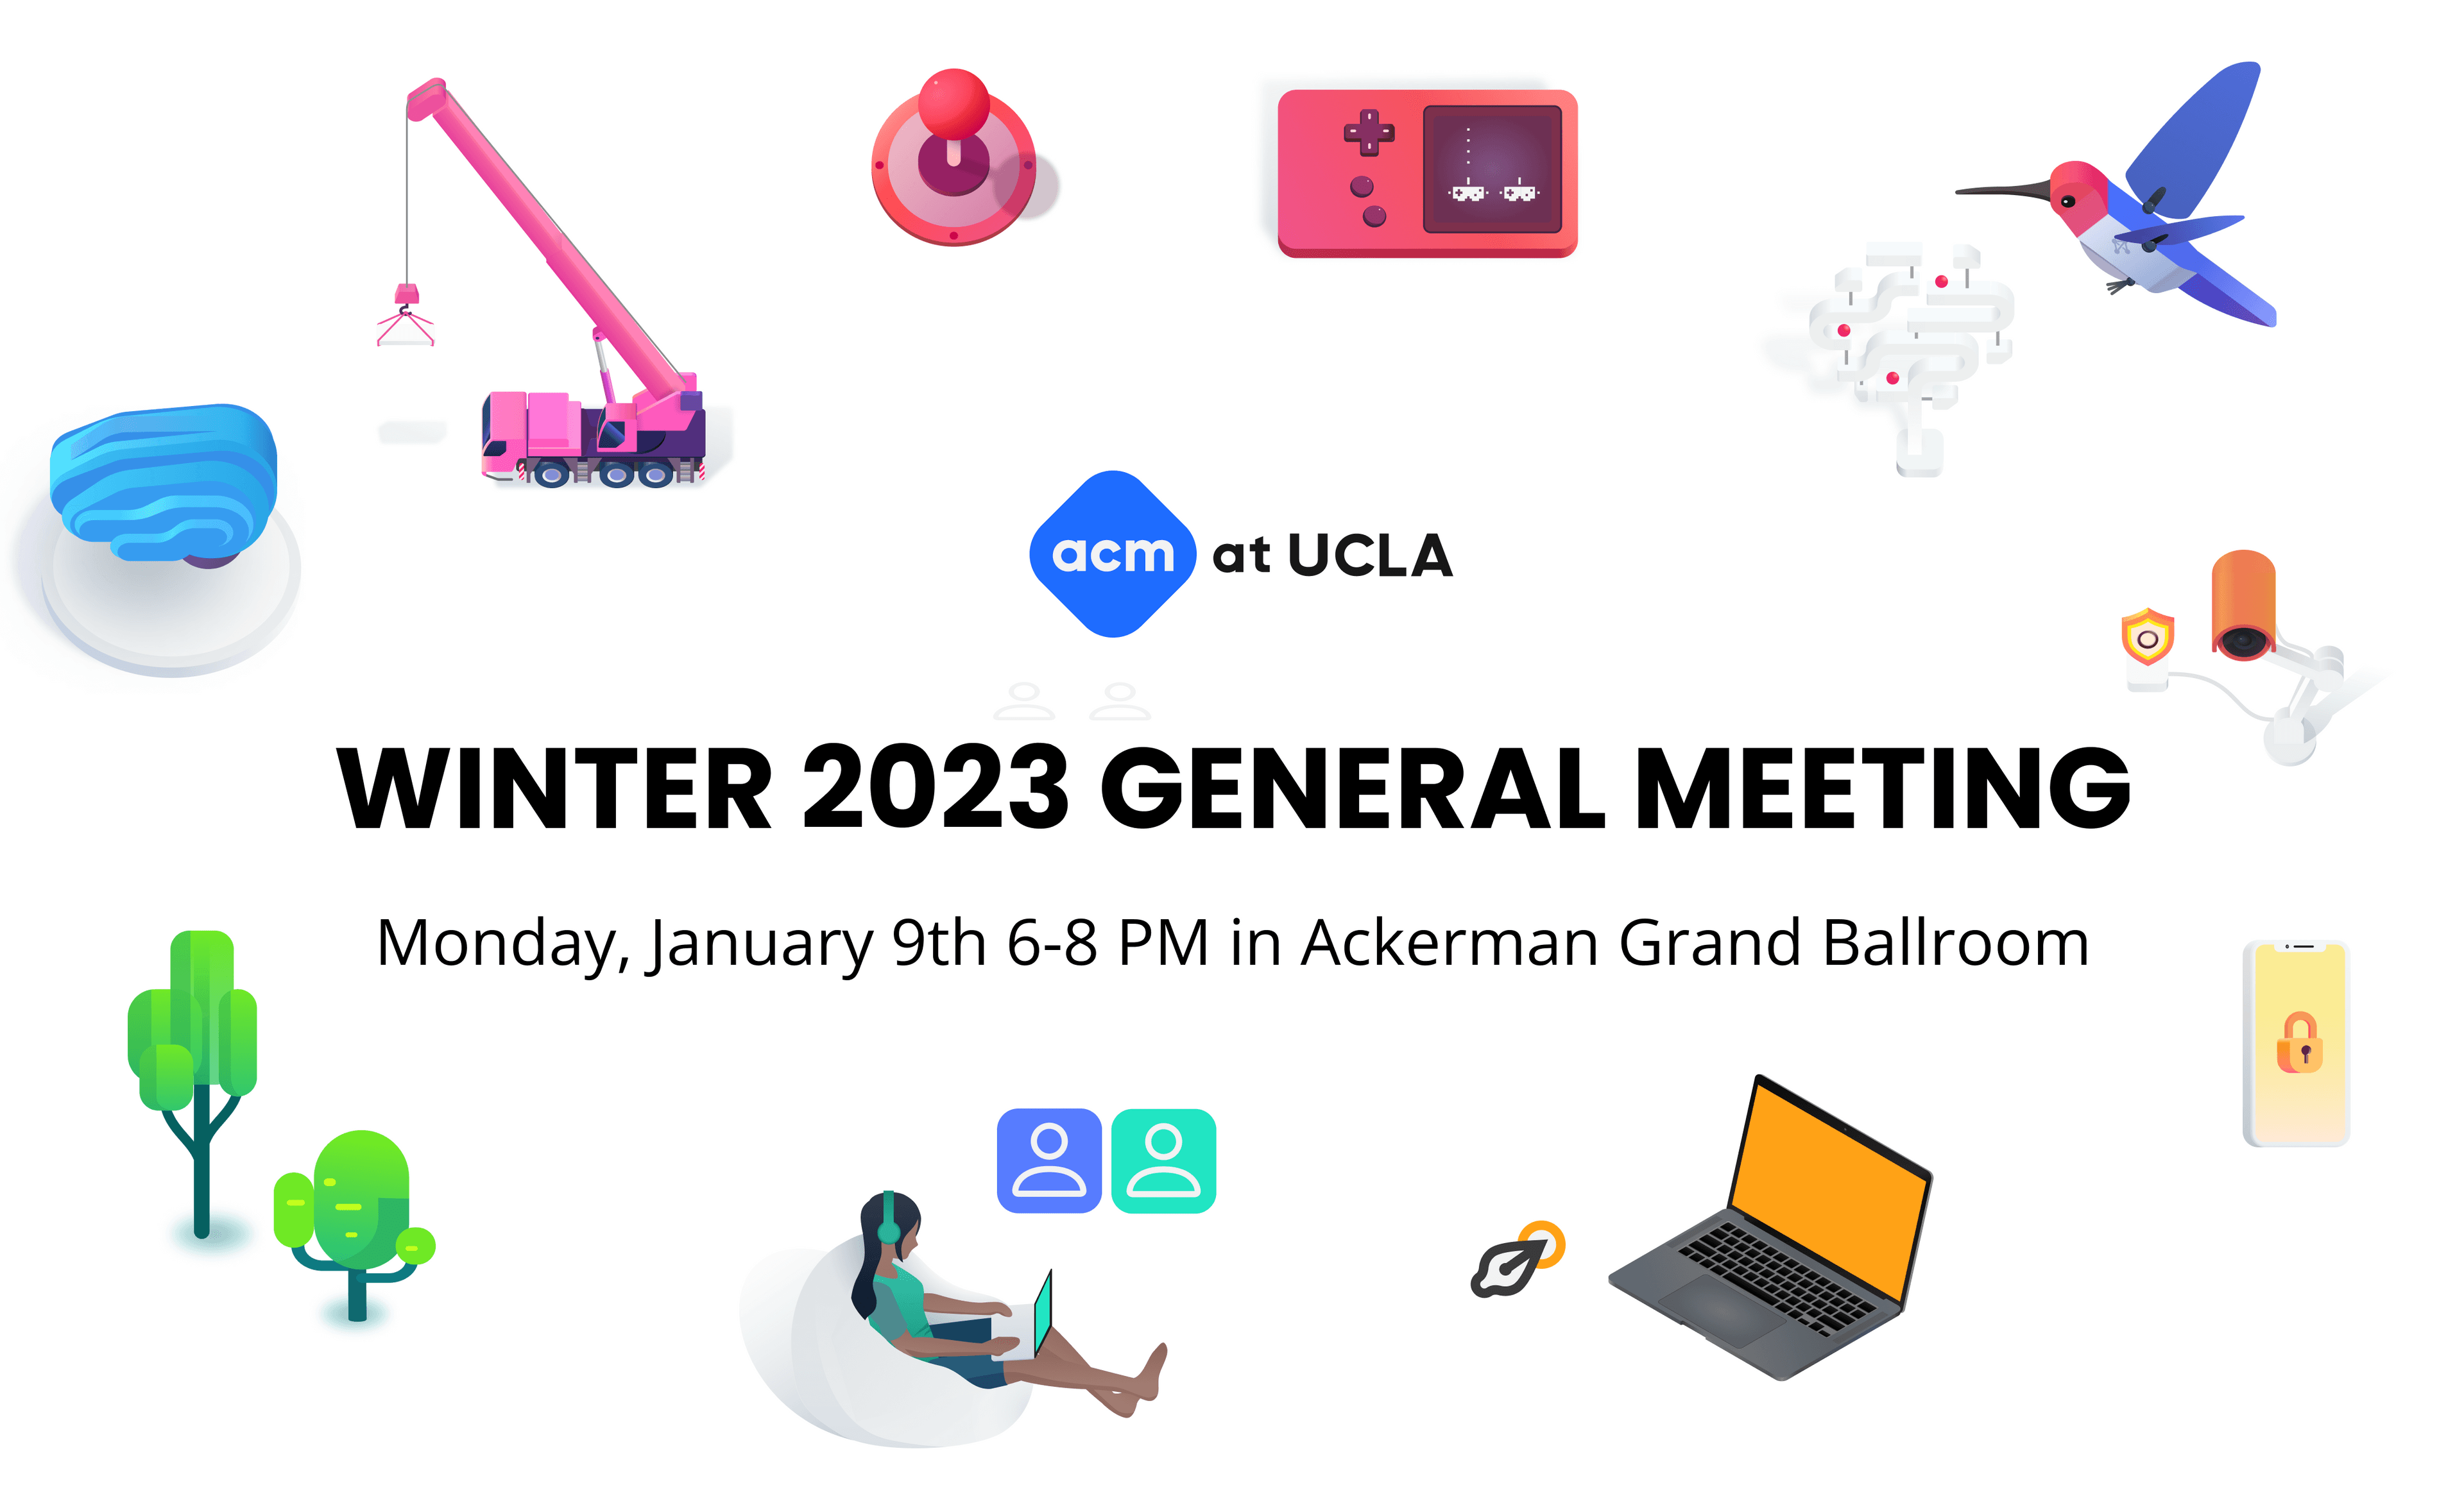 Winter GM 2023 Marketing Graphic. Winter GM will happen on Monday, January 9th from 6pm to 8pm in the Ackerman Grand Ballroom